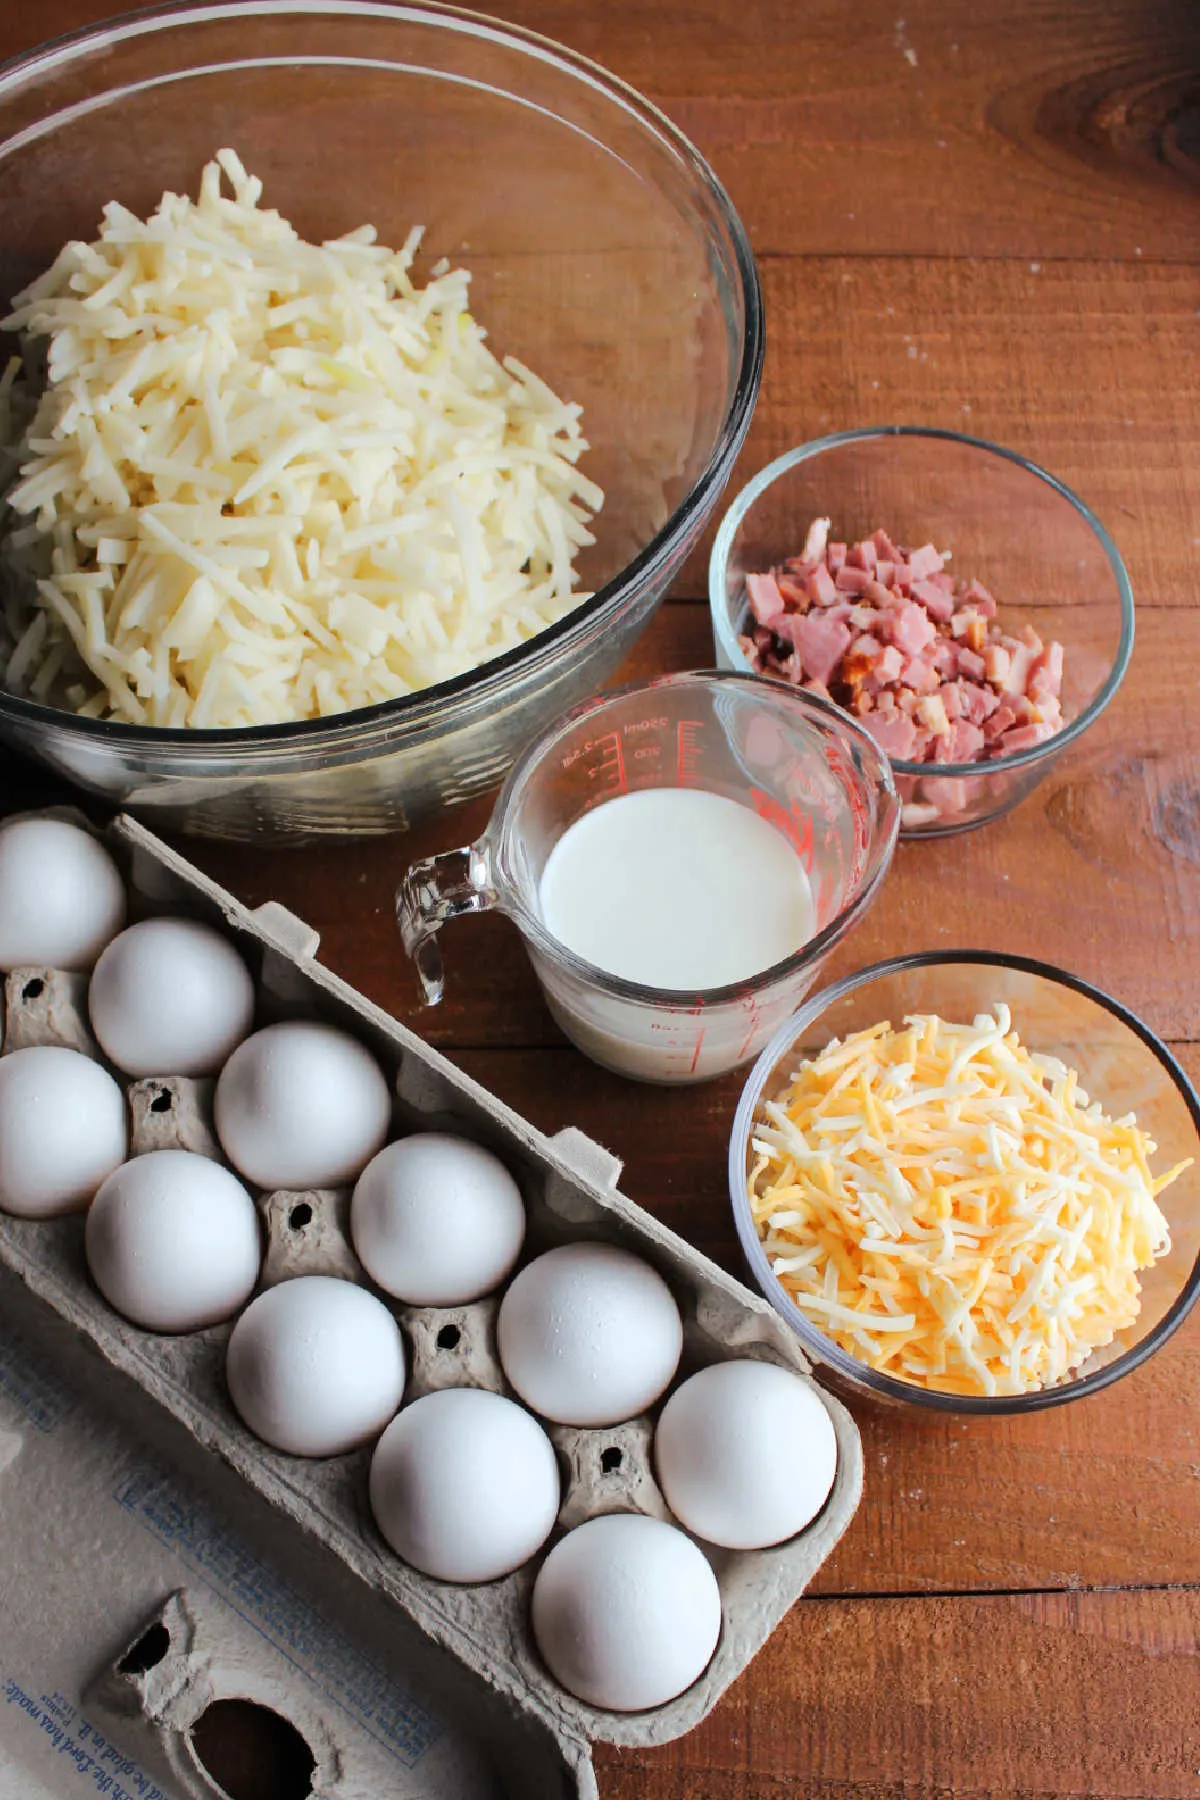 Ingredients including shredded hash browns, eggs, cheese, milk and ham ready to be made into breakfast pizza.